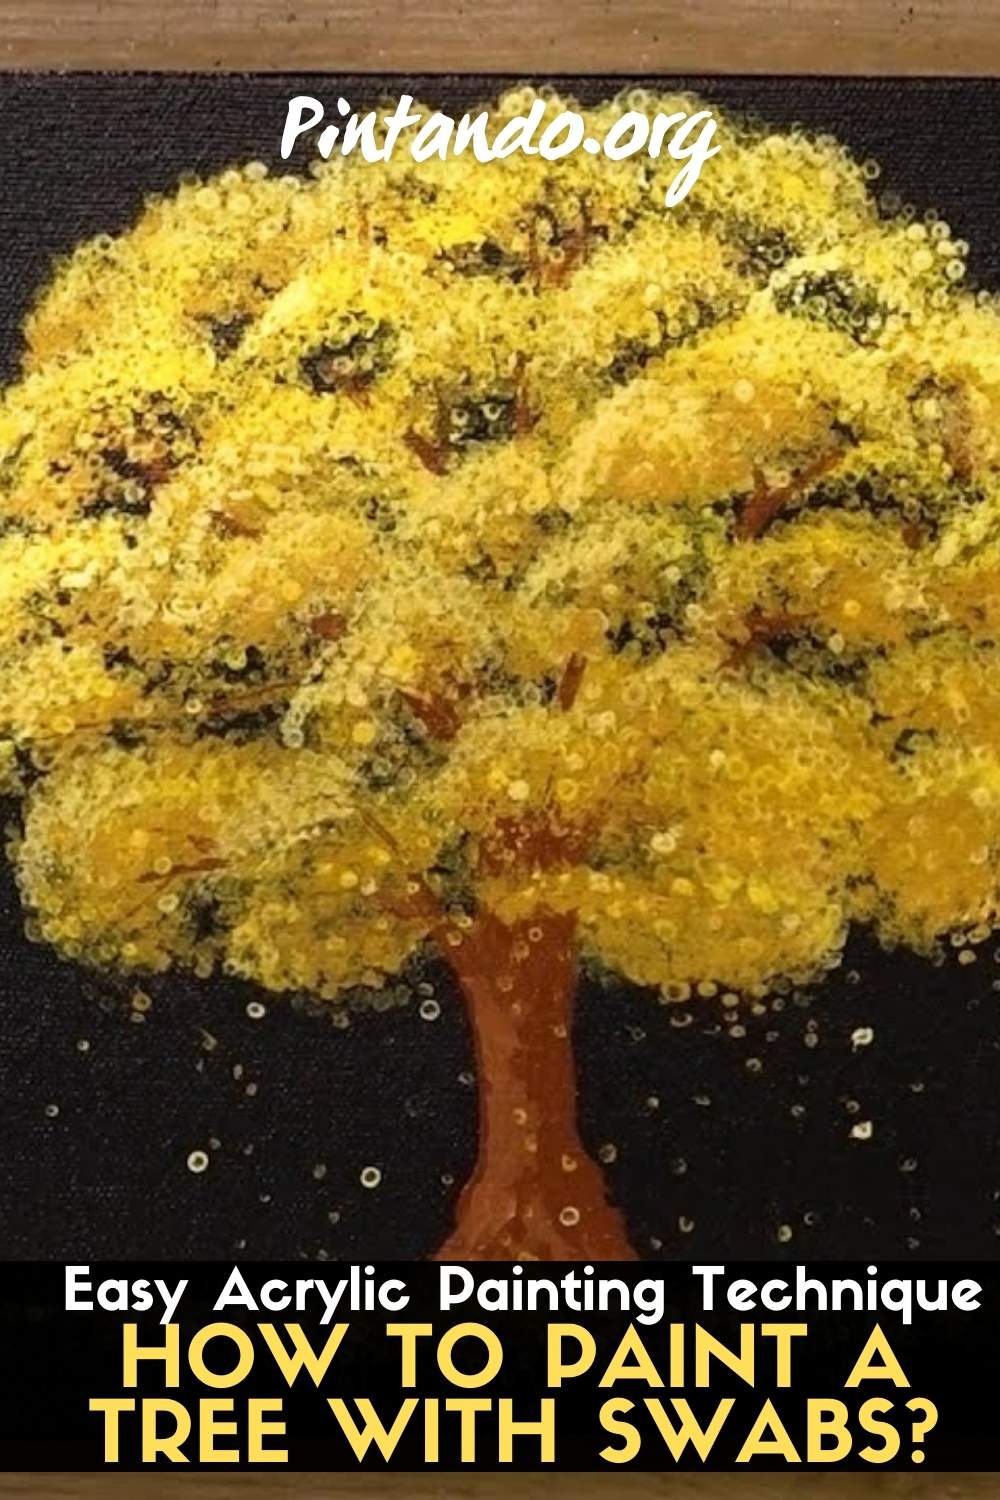 _How to paint a tree with swabs Easy Acrylic Painting Technique (3)